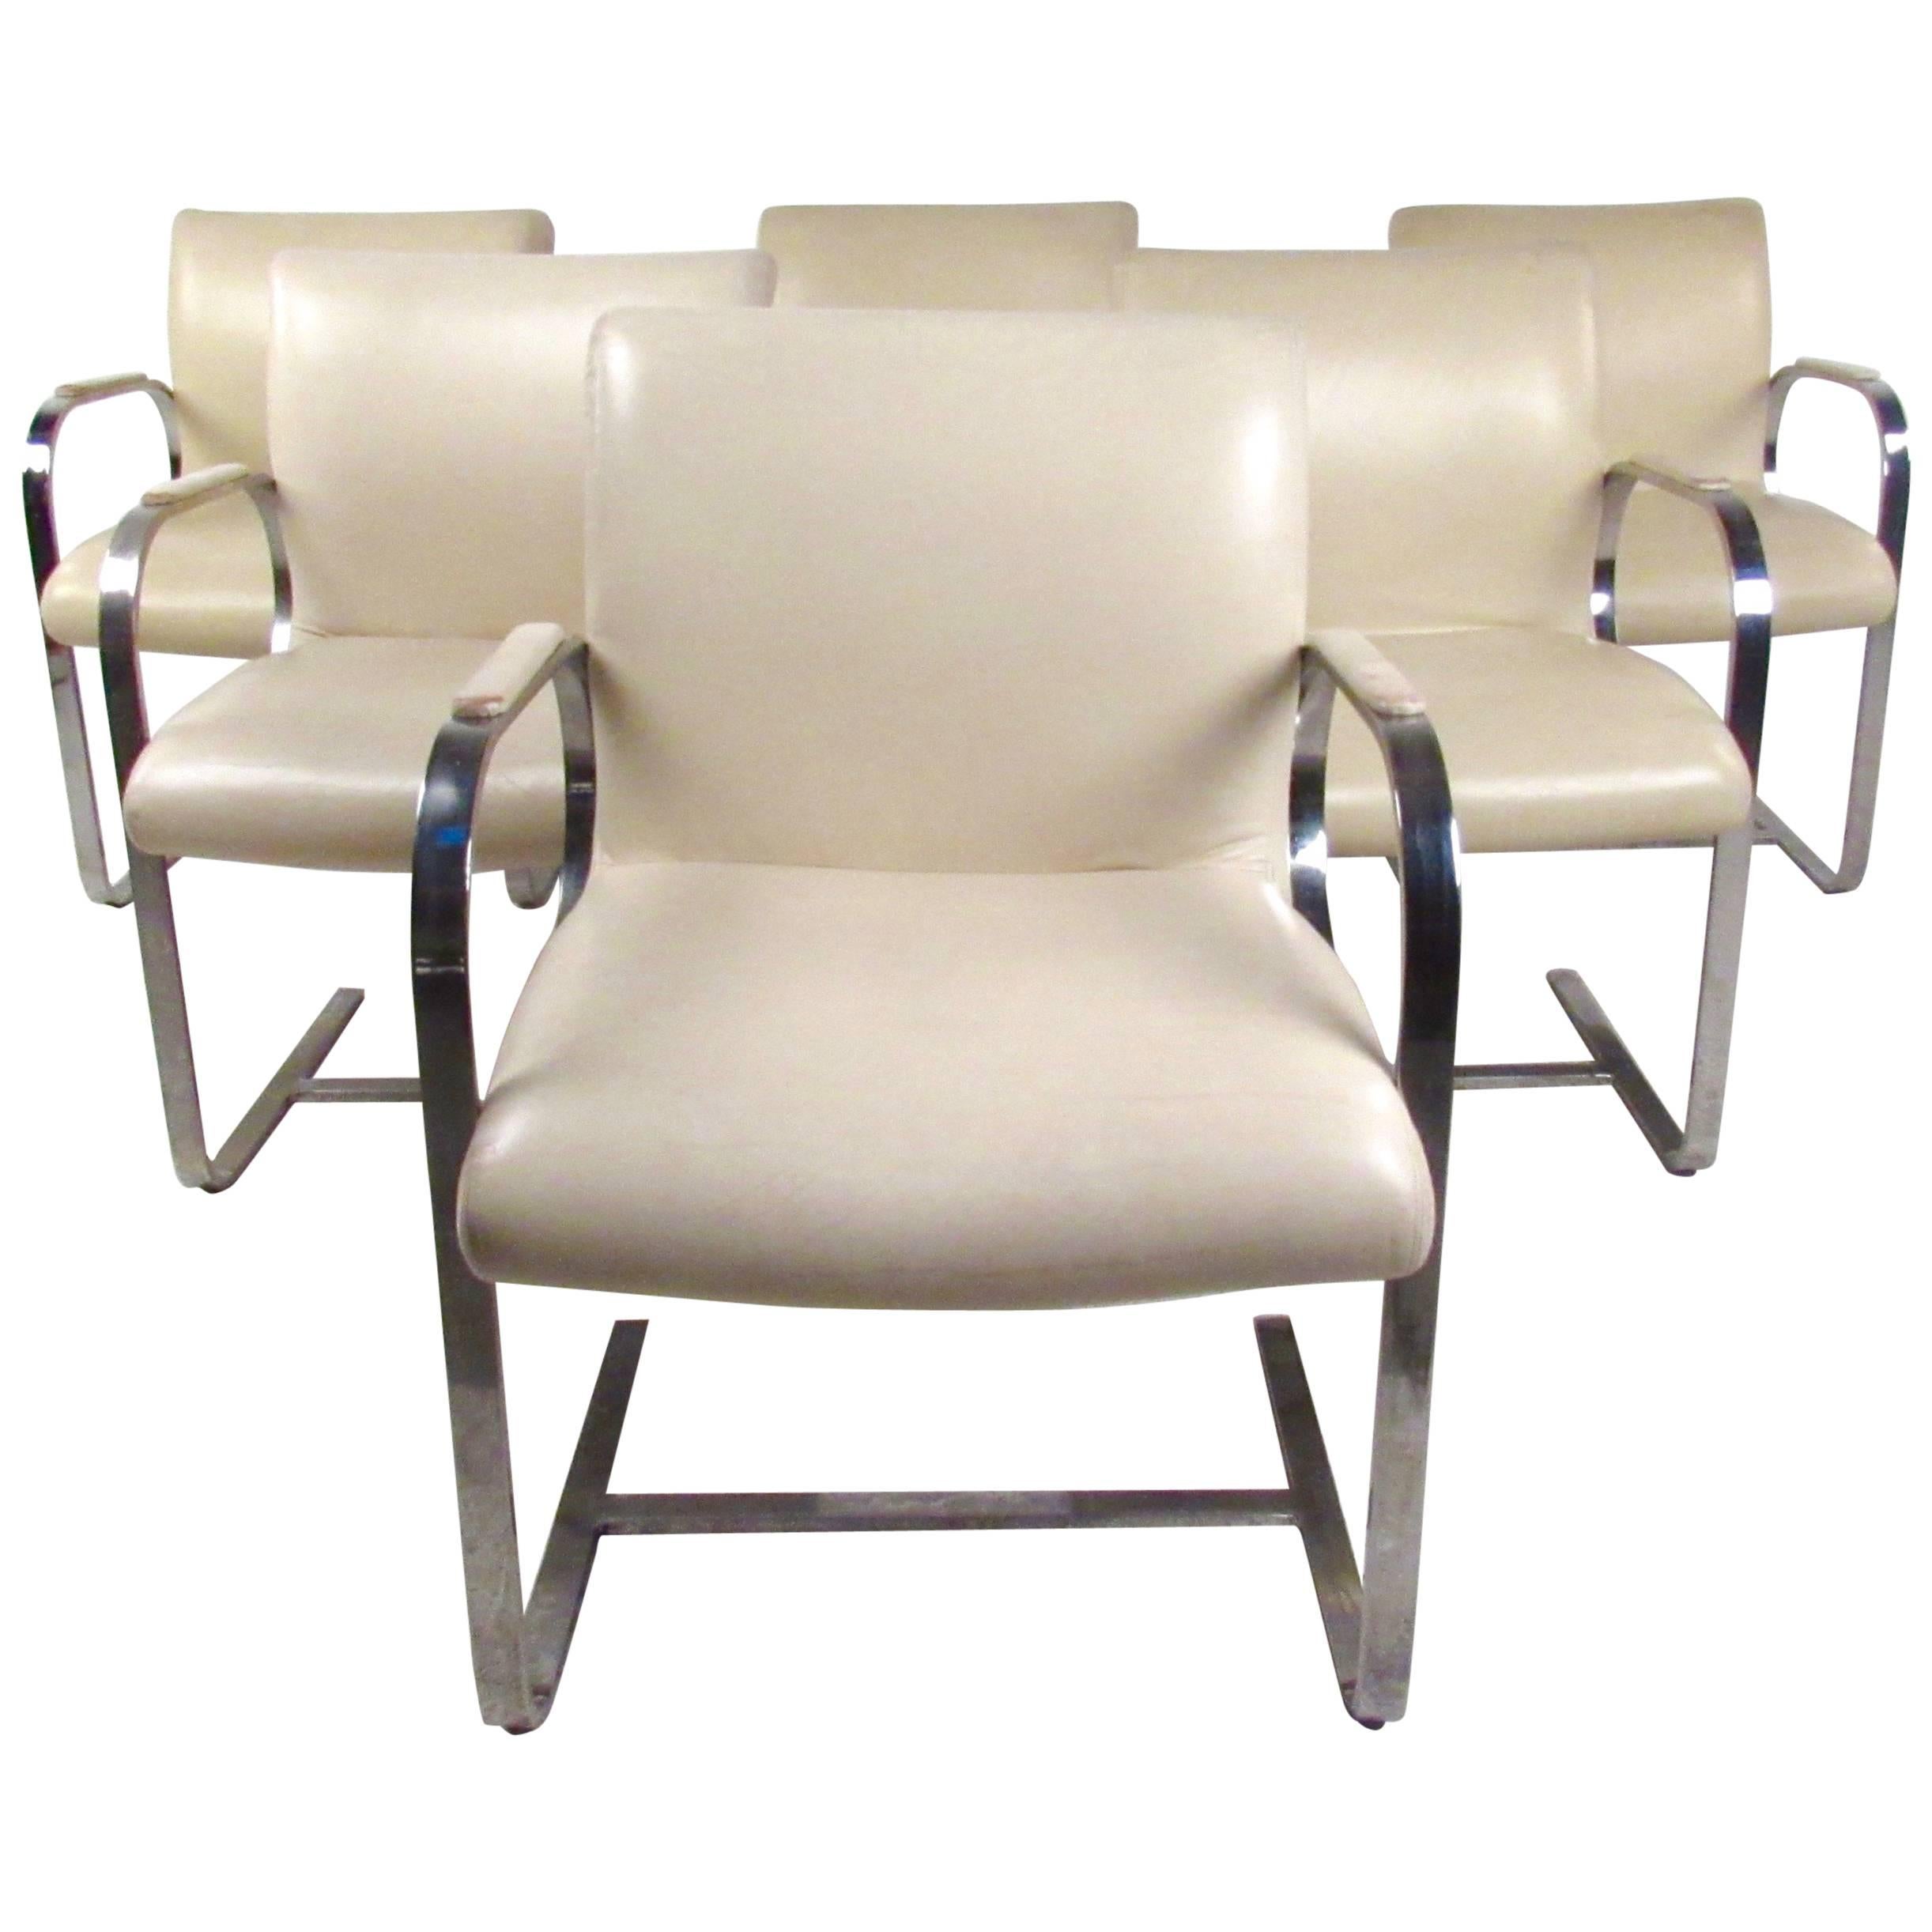 Mid-Century Modern Mies van der Rohe Brno Style Dining Chairs For Sale